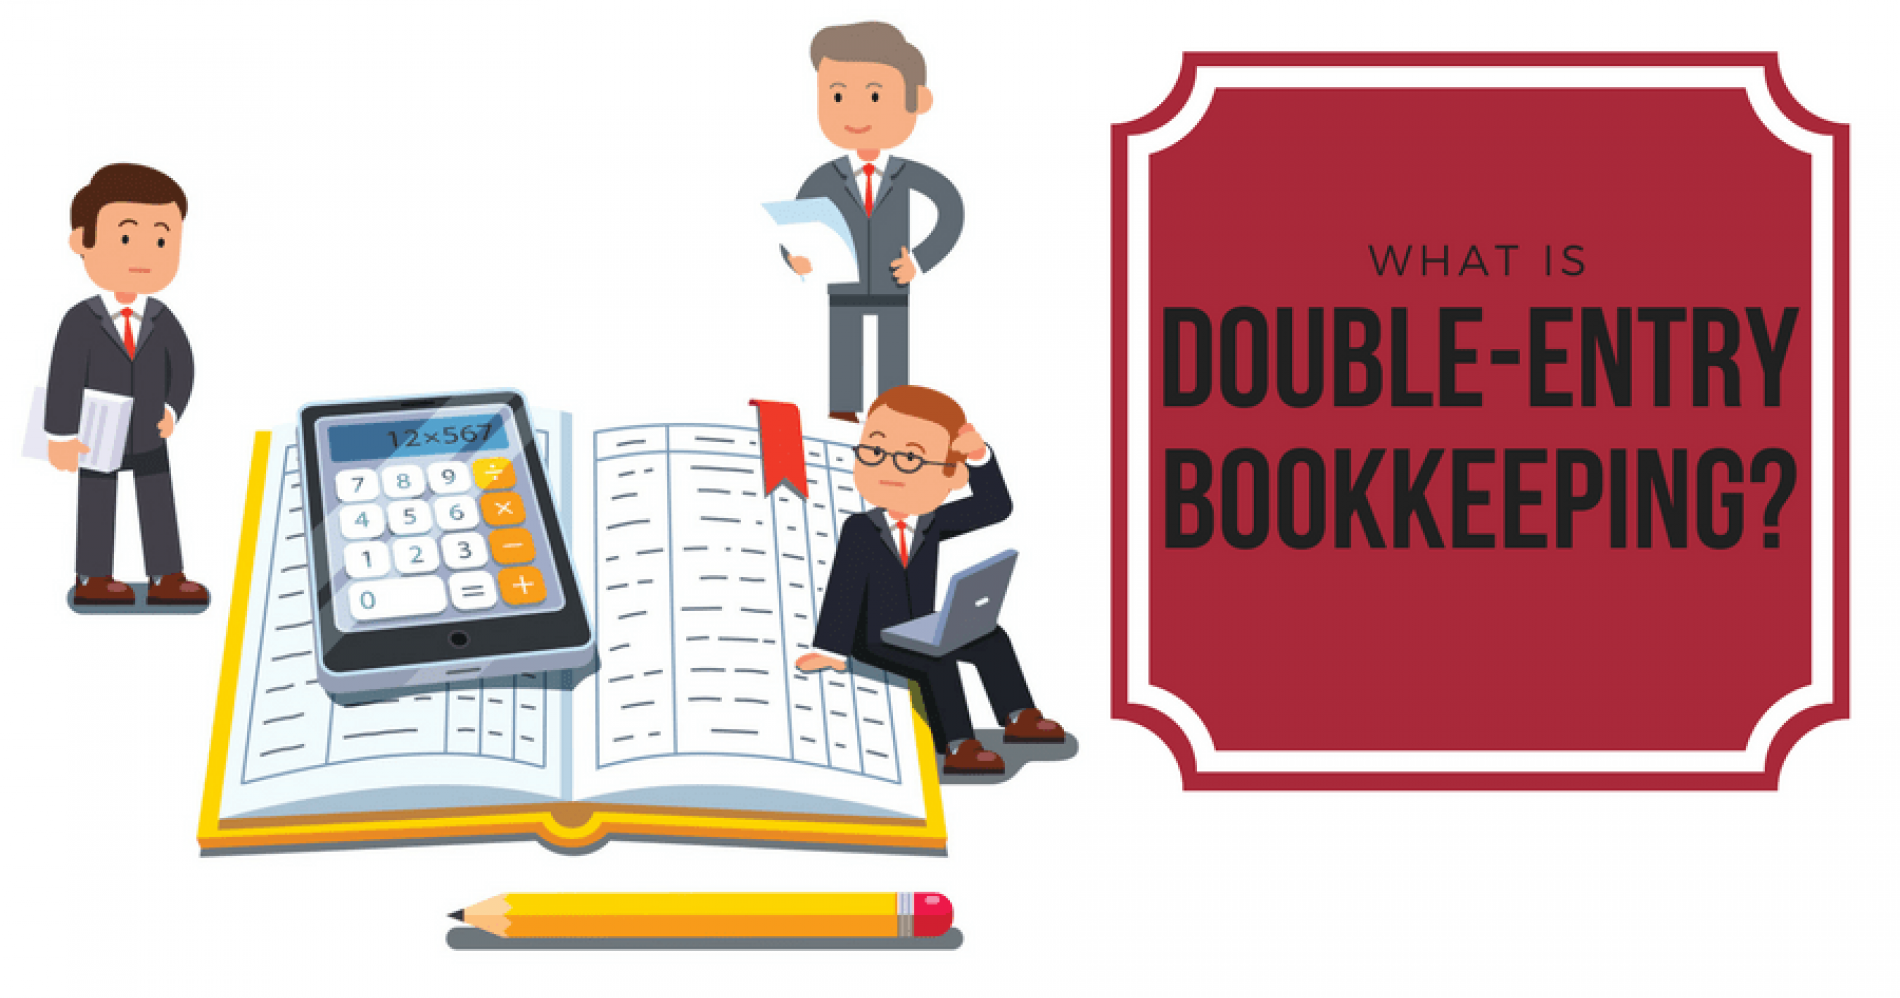 Double Entry Bookkeeping (Sumber gambar: workful.com)